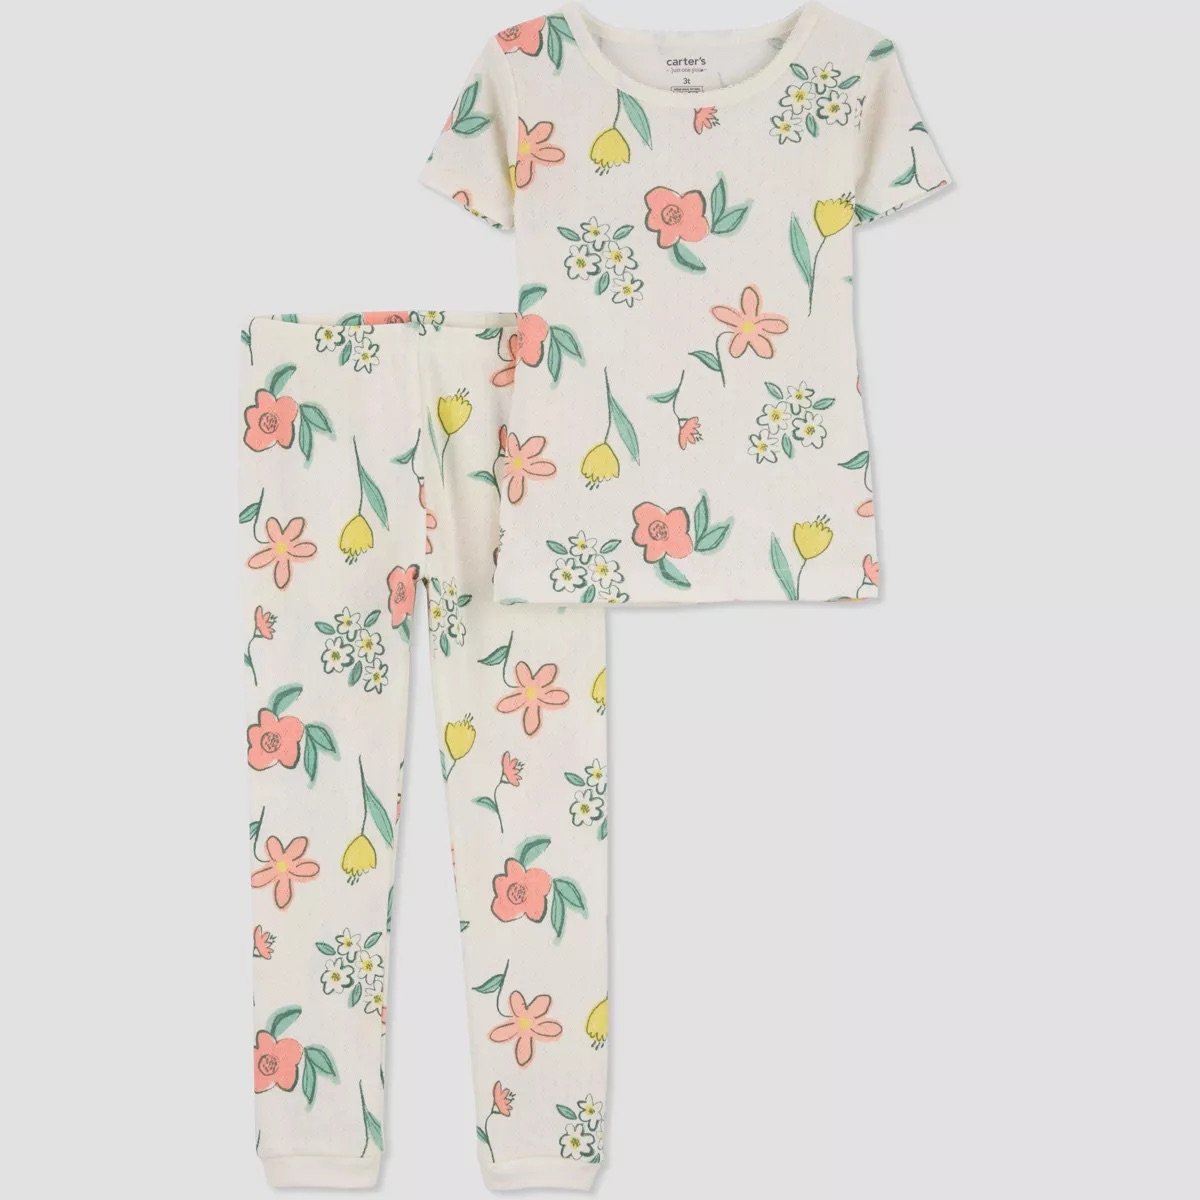 Carters Just One You Toddler Girls 2pc Pajama Set White Green Floral.jpeg